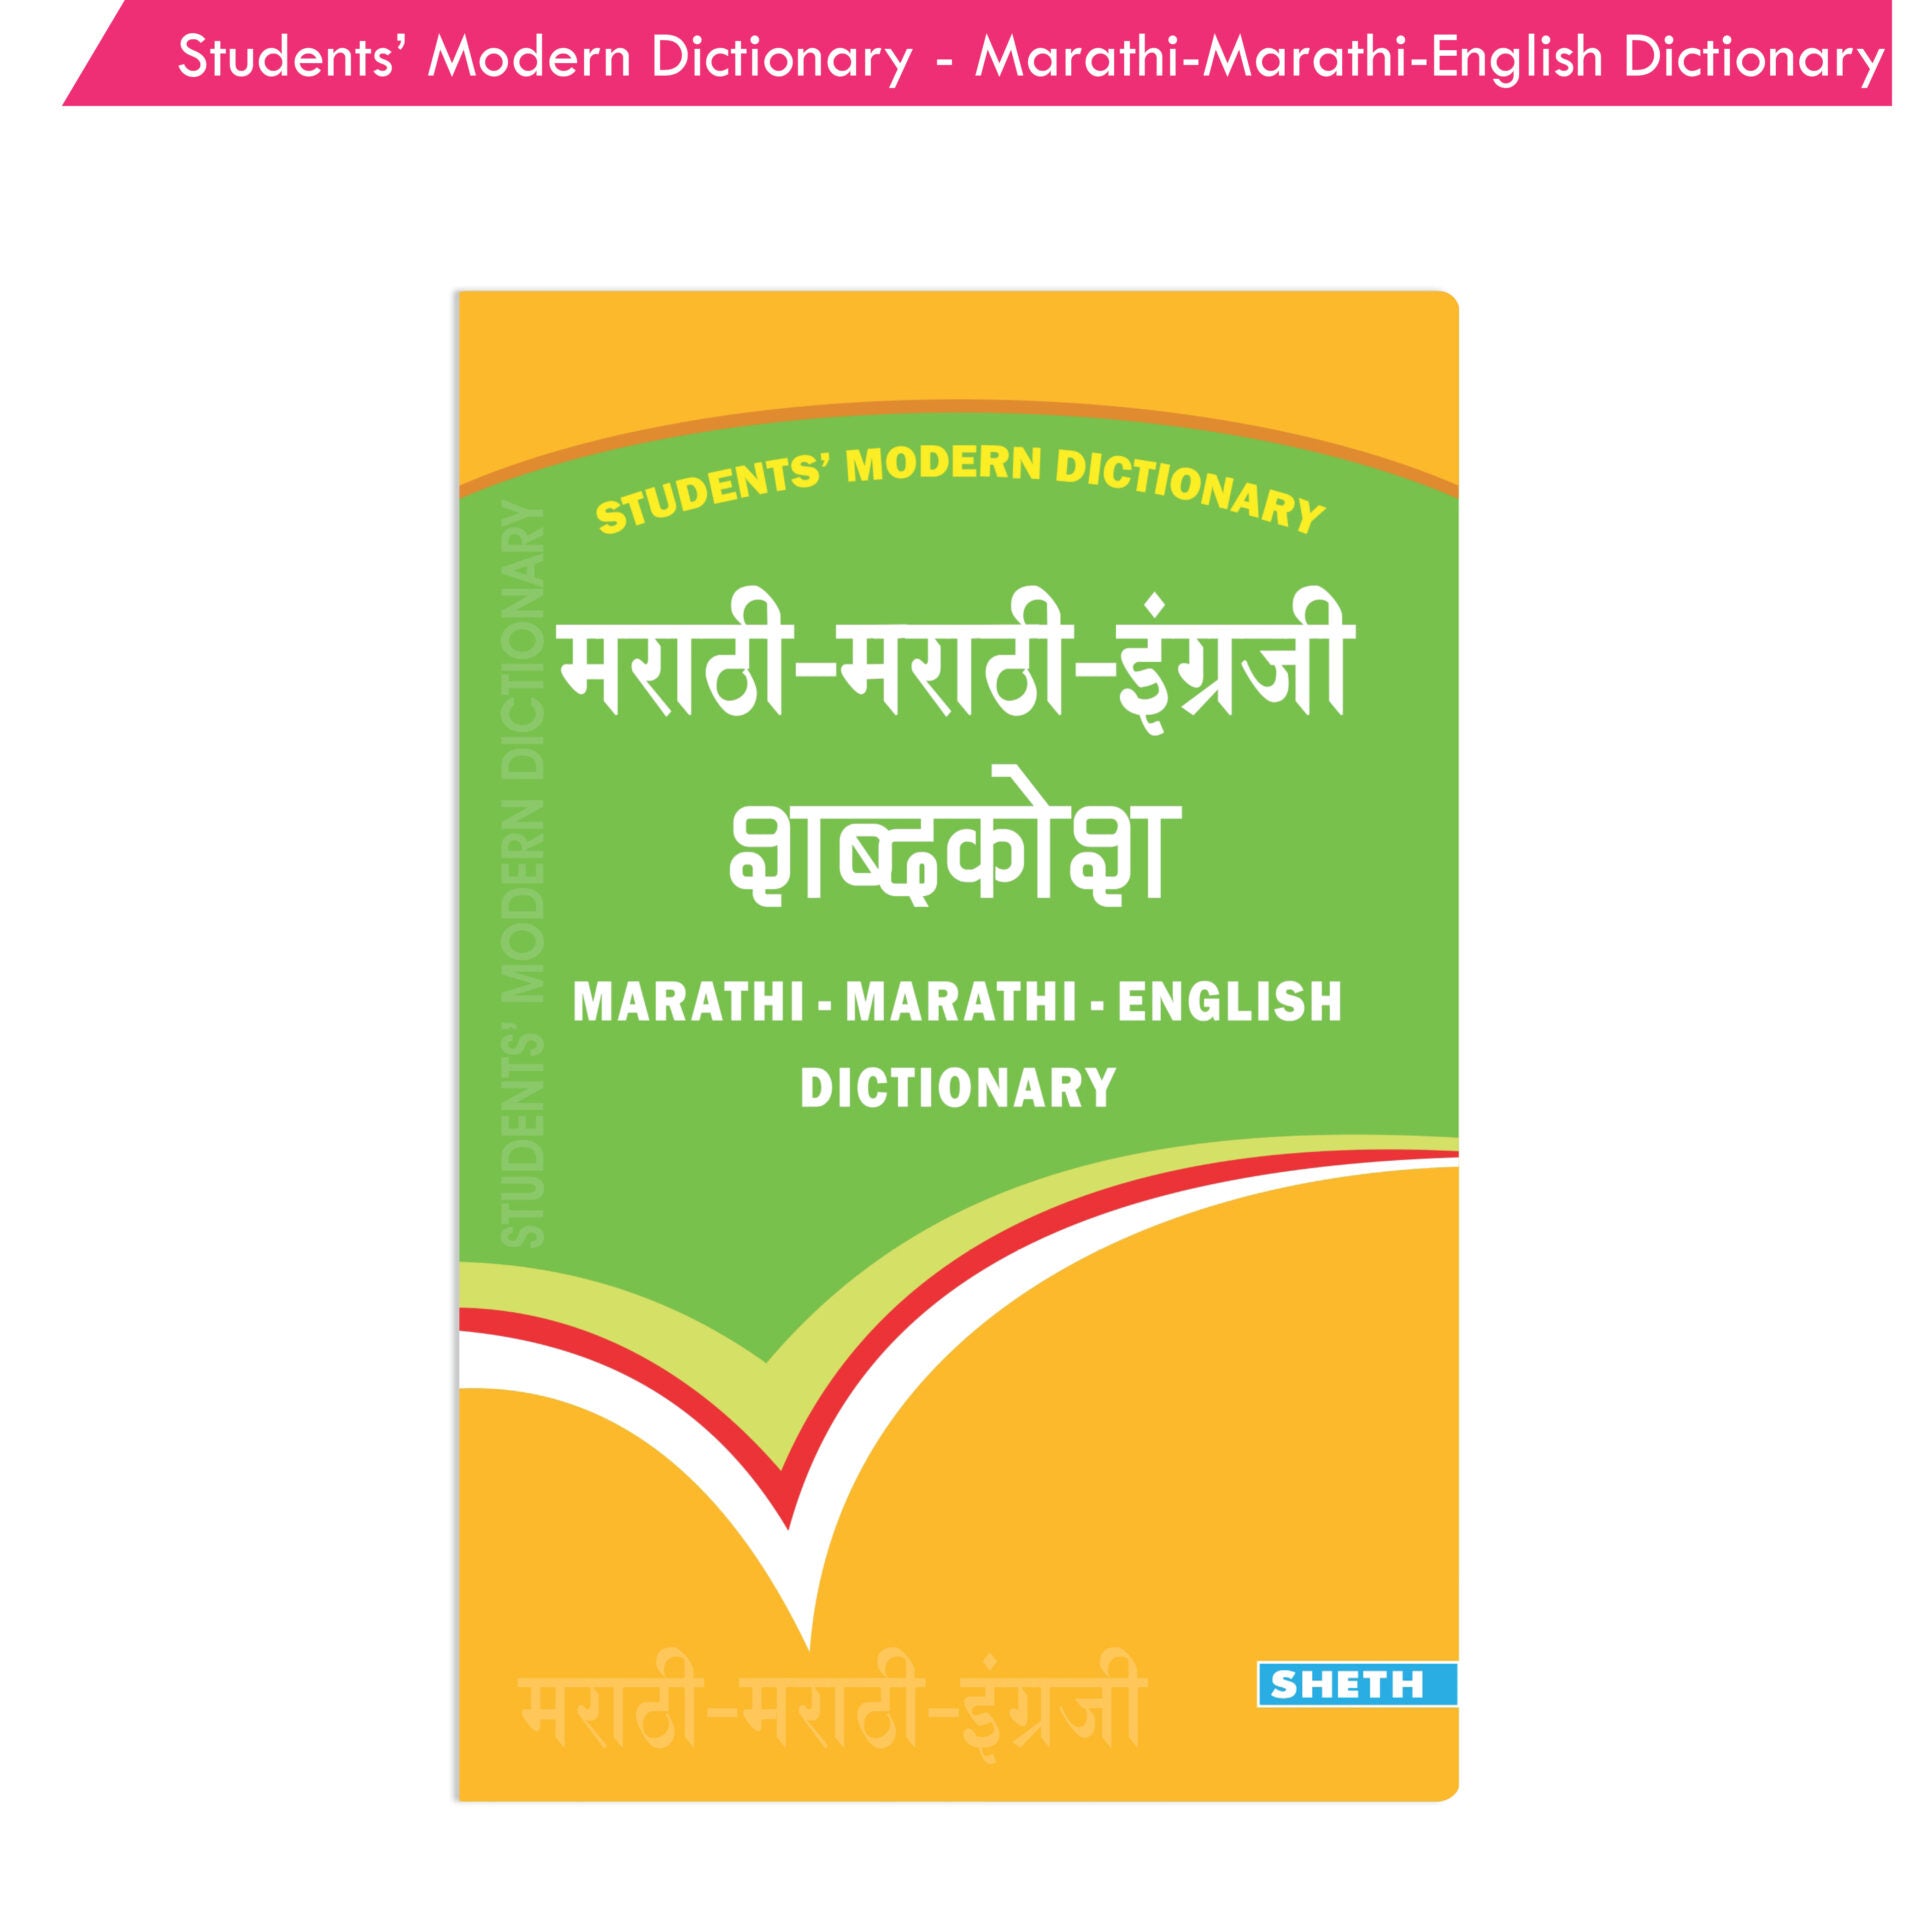 English to Marathi Dictionary - Meaning of River in Marathi is